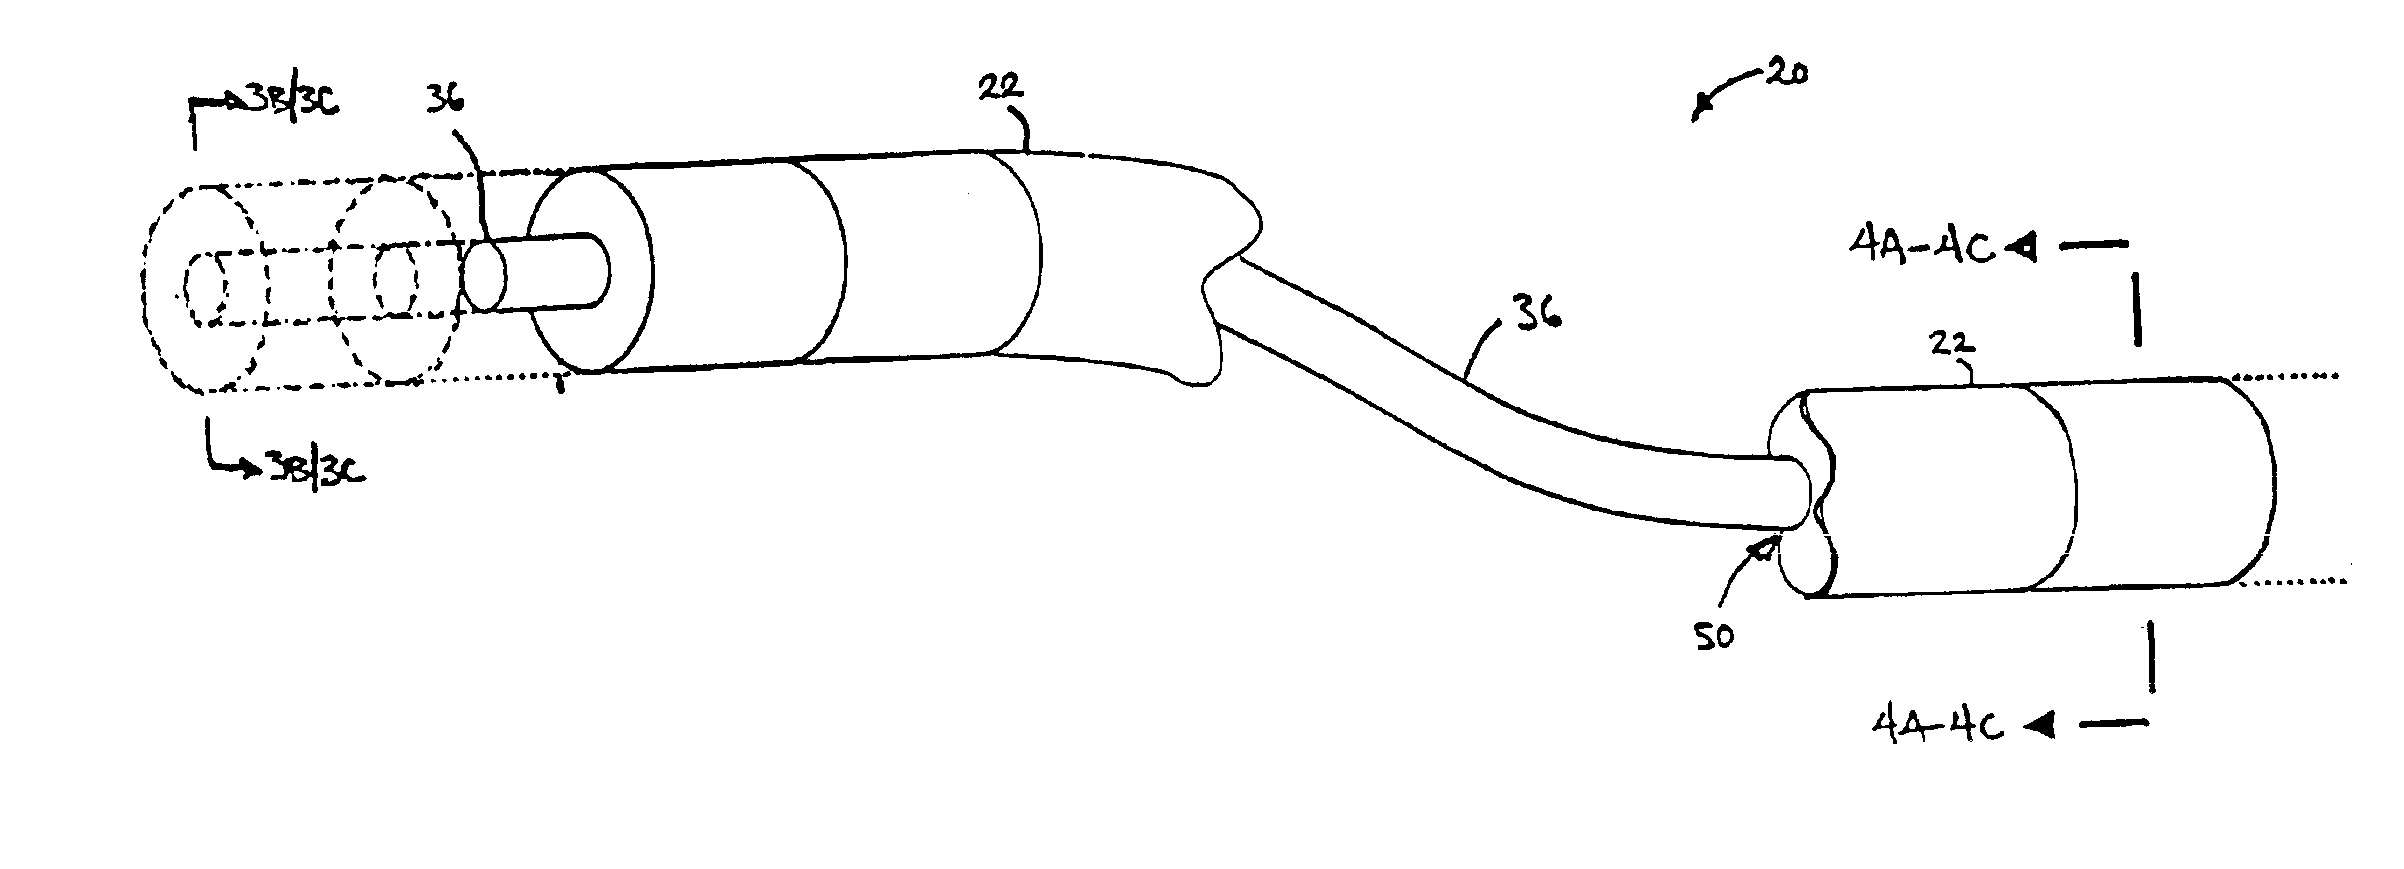 Endoscope with adjacently positioned guiding apparatus